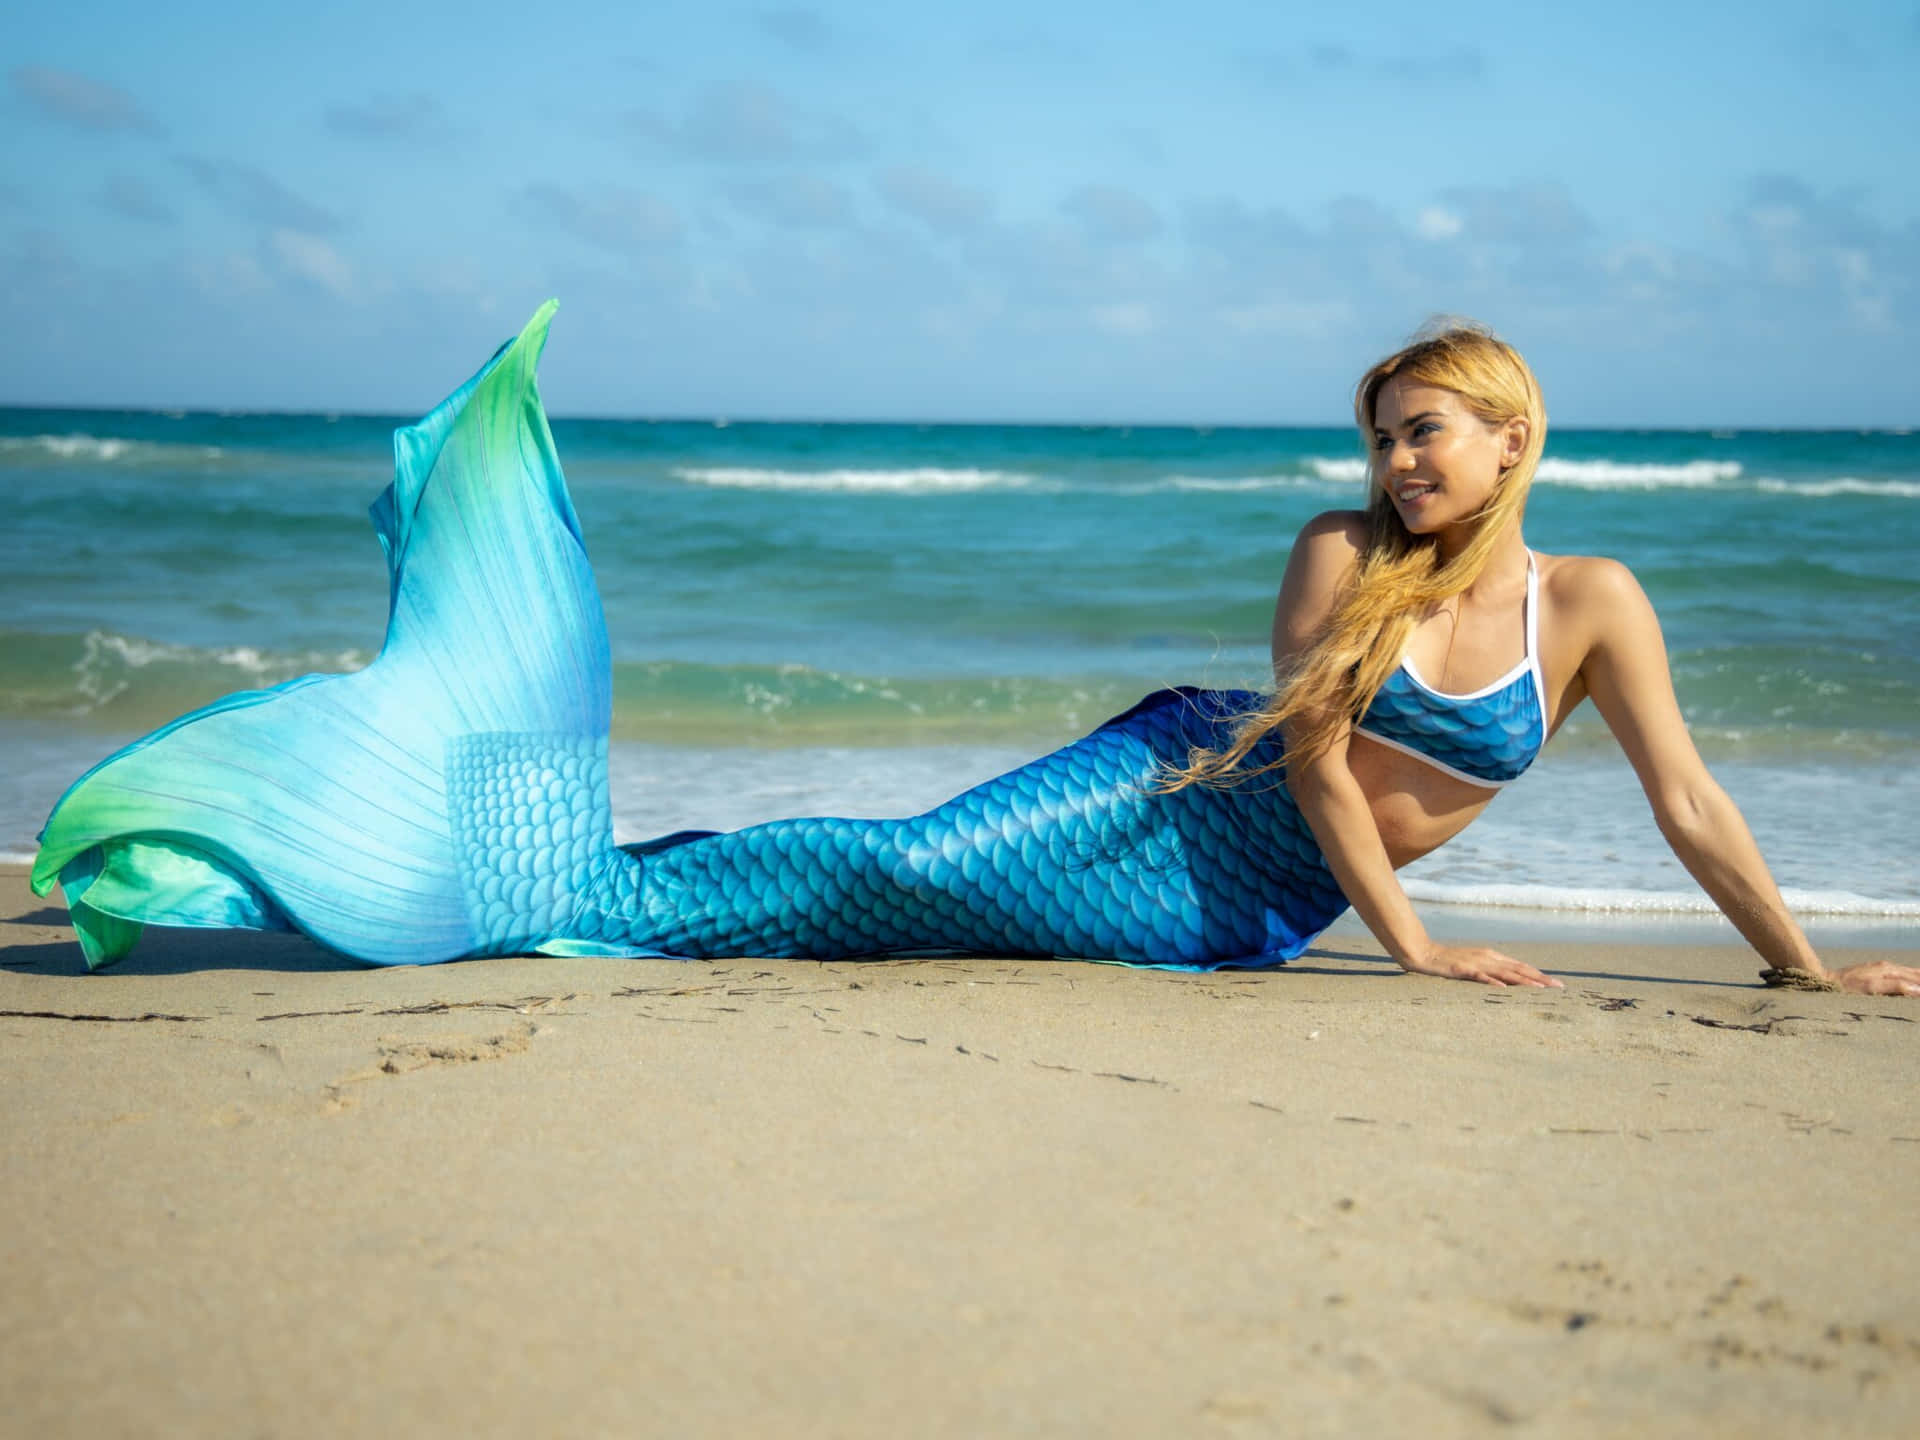 A Beautiful Woman In A Blue Mermaid Tail Laying On The Beach